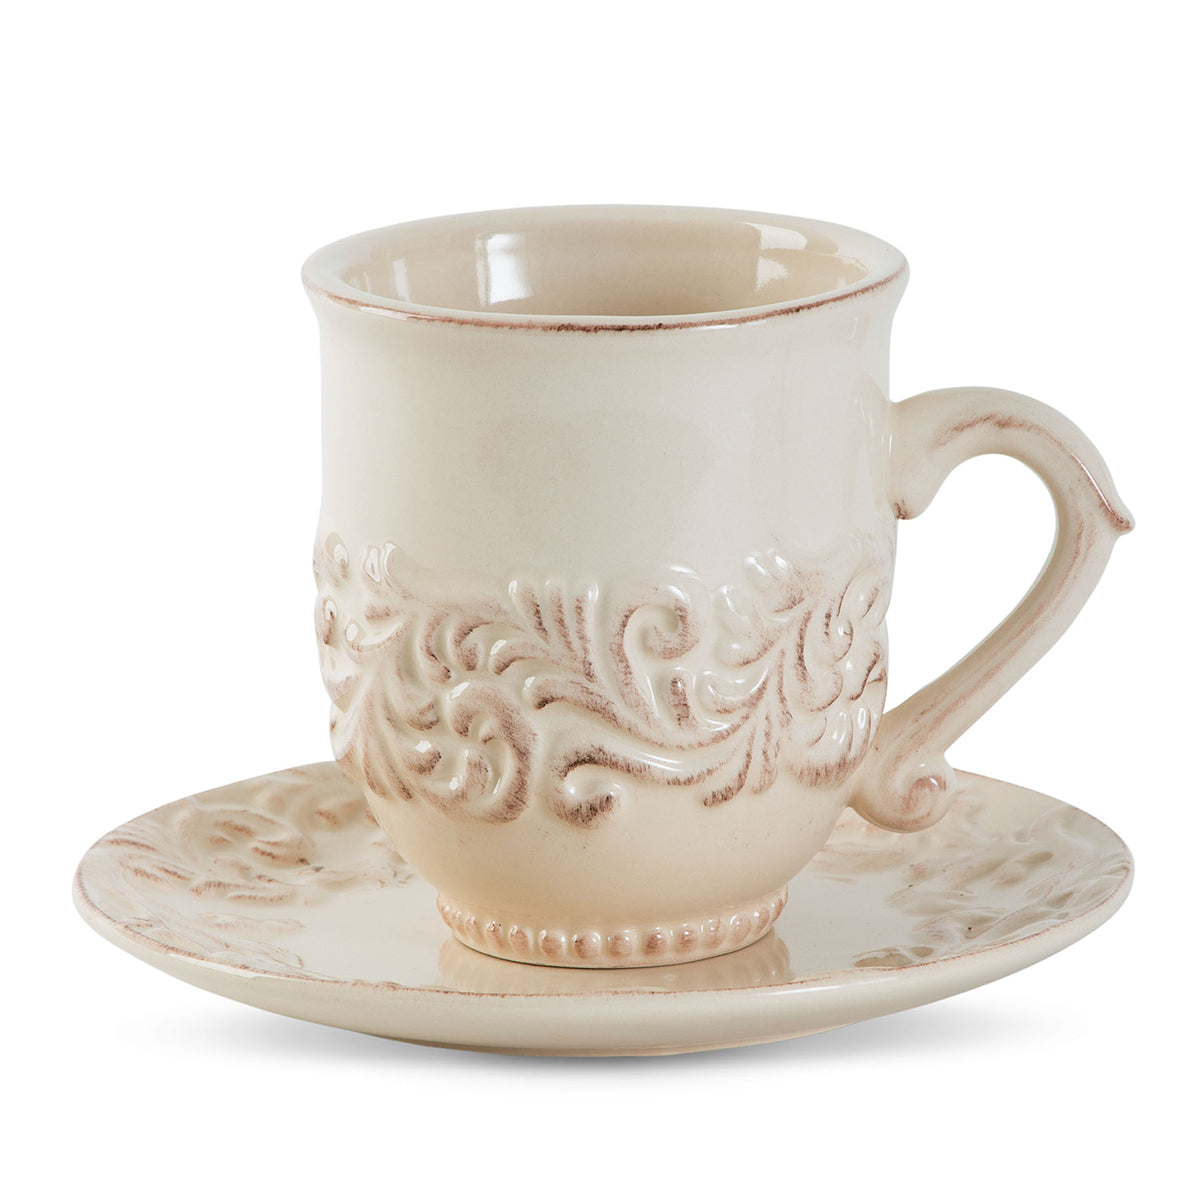 GG Collection Ceramic Cup and Saucer - Cream - Set of 4